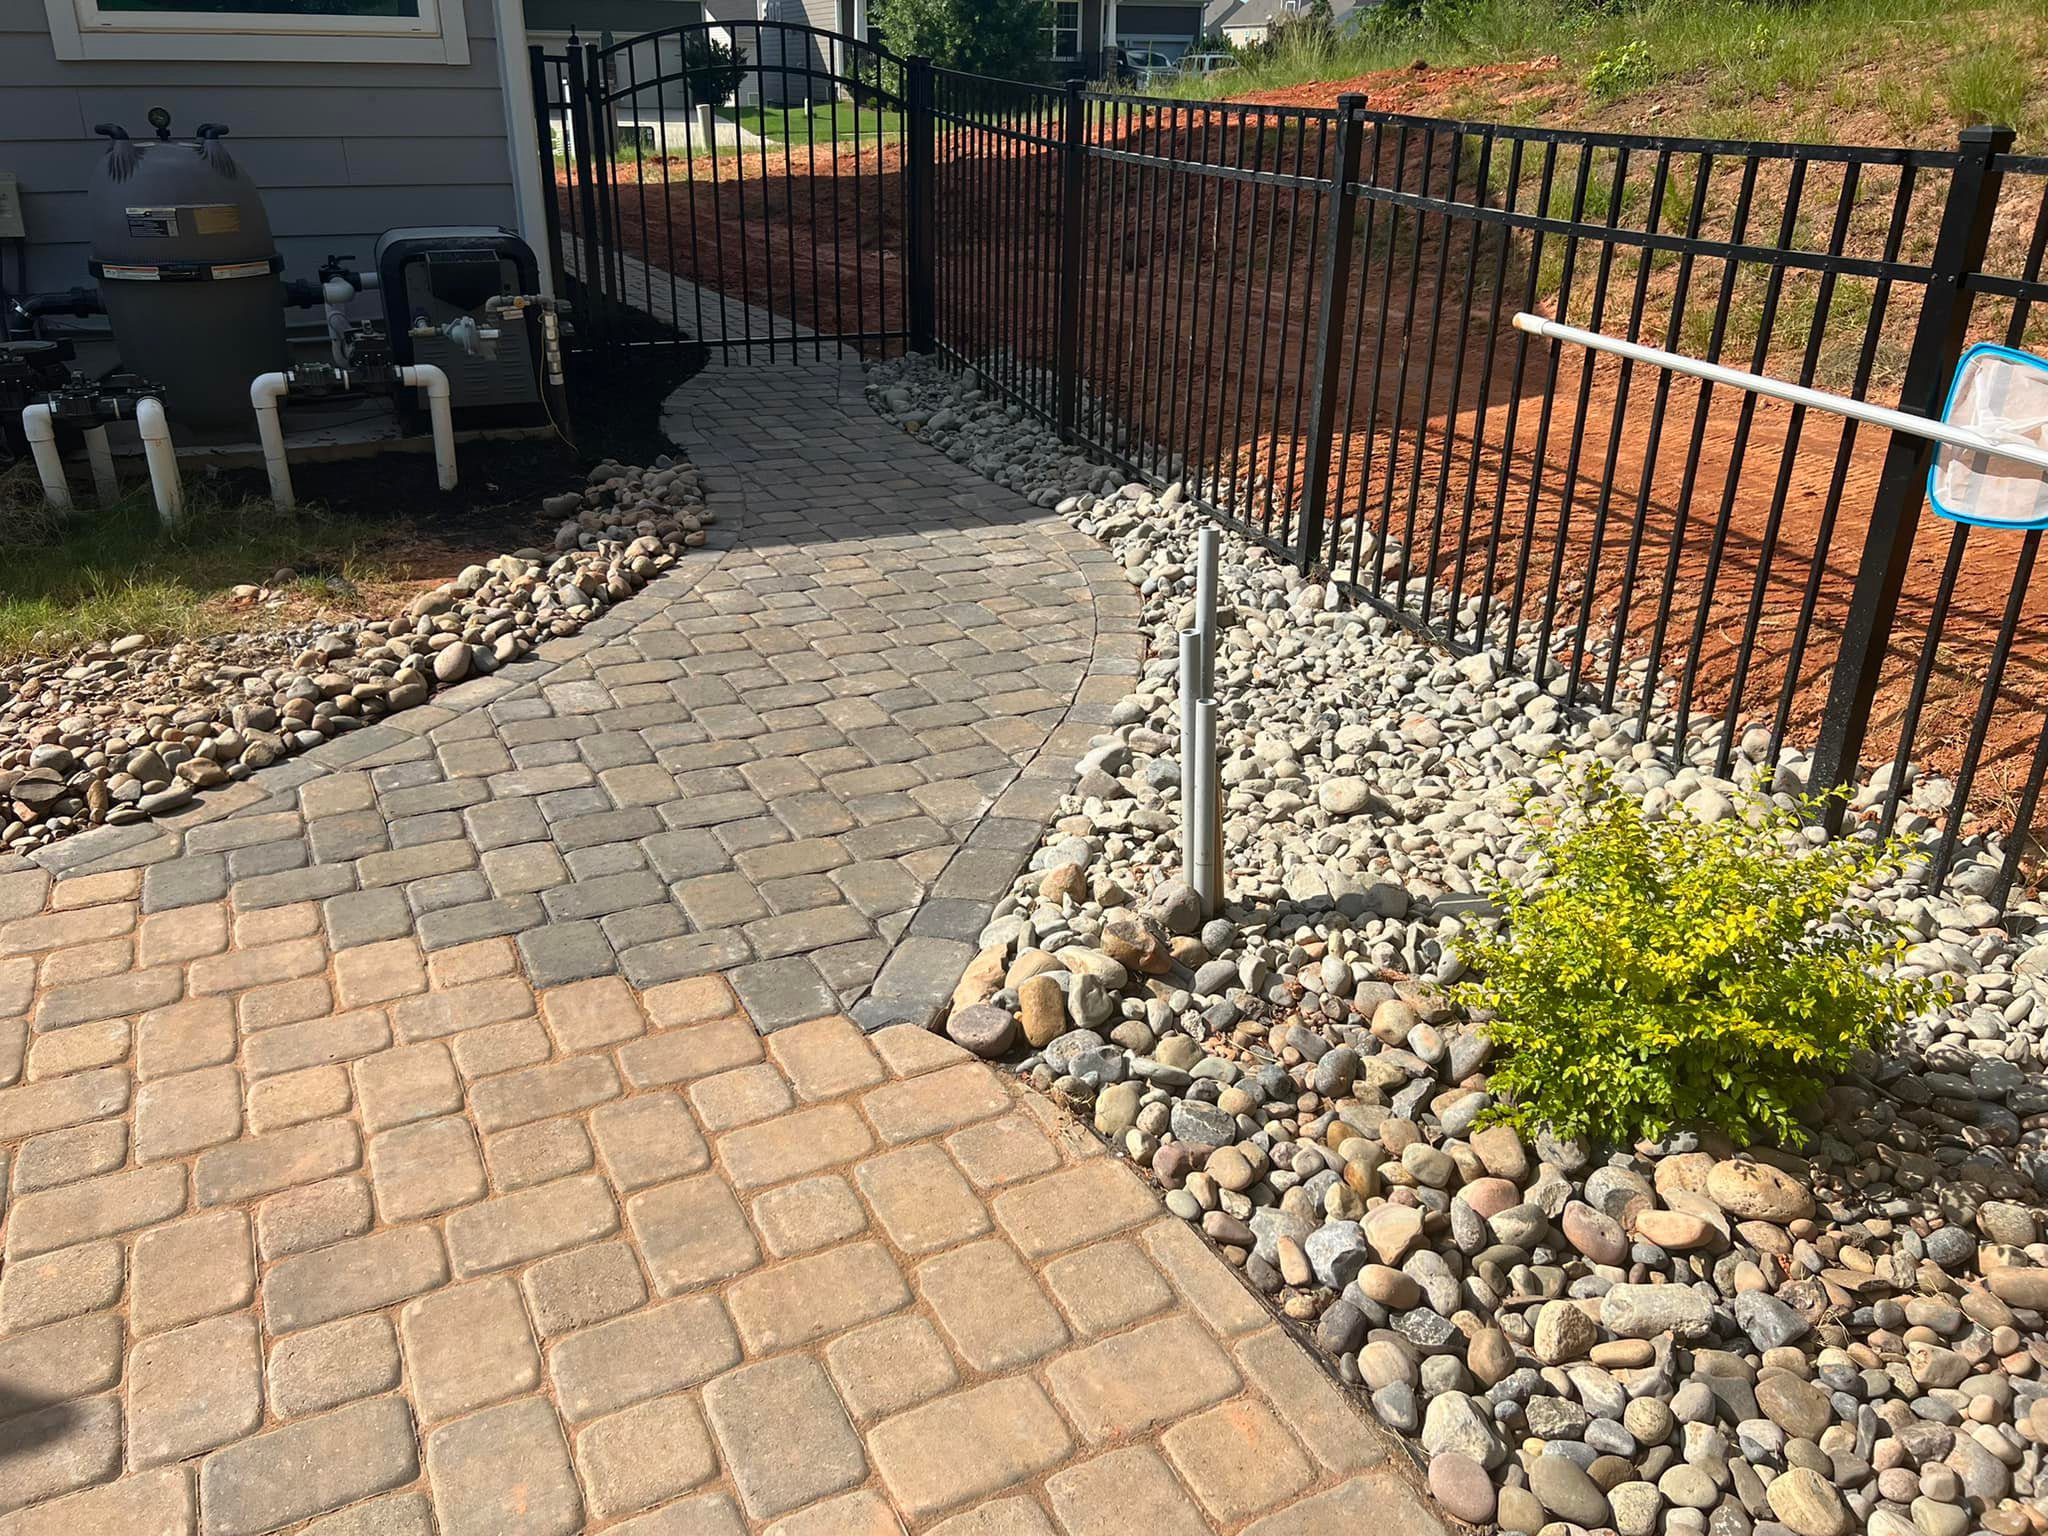 Paver Pathway – Outdoor Living Tip of the Day